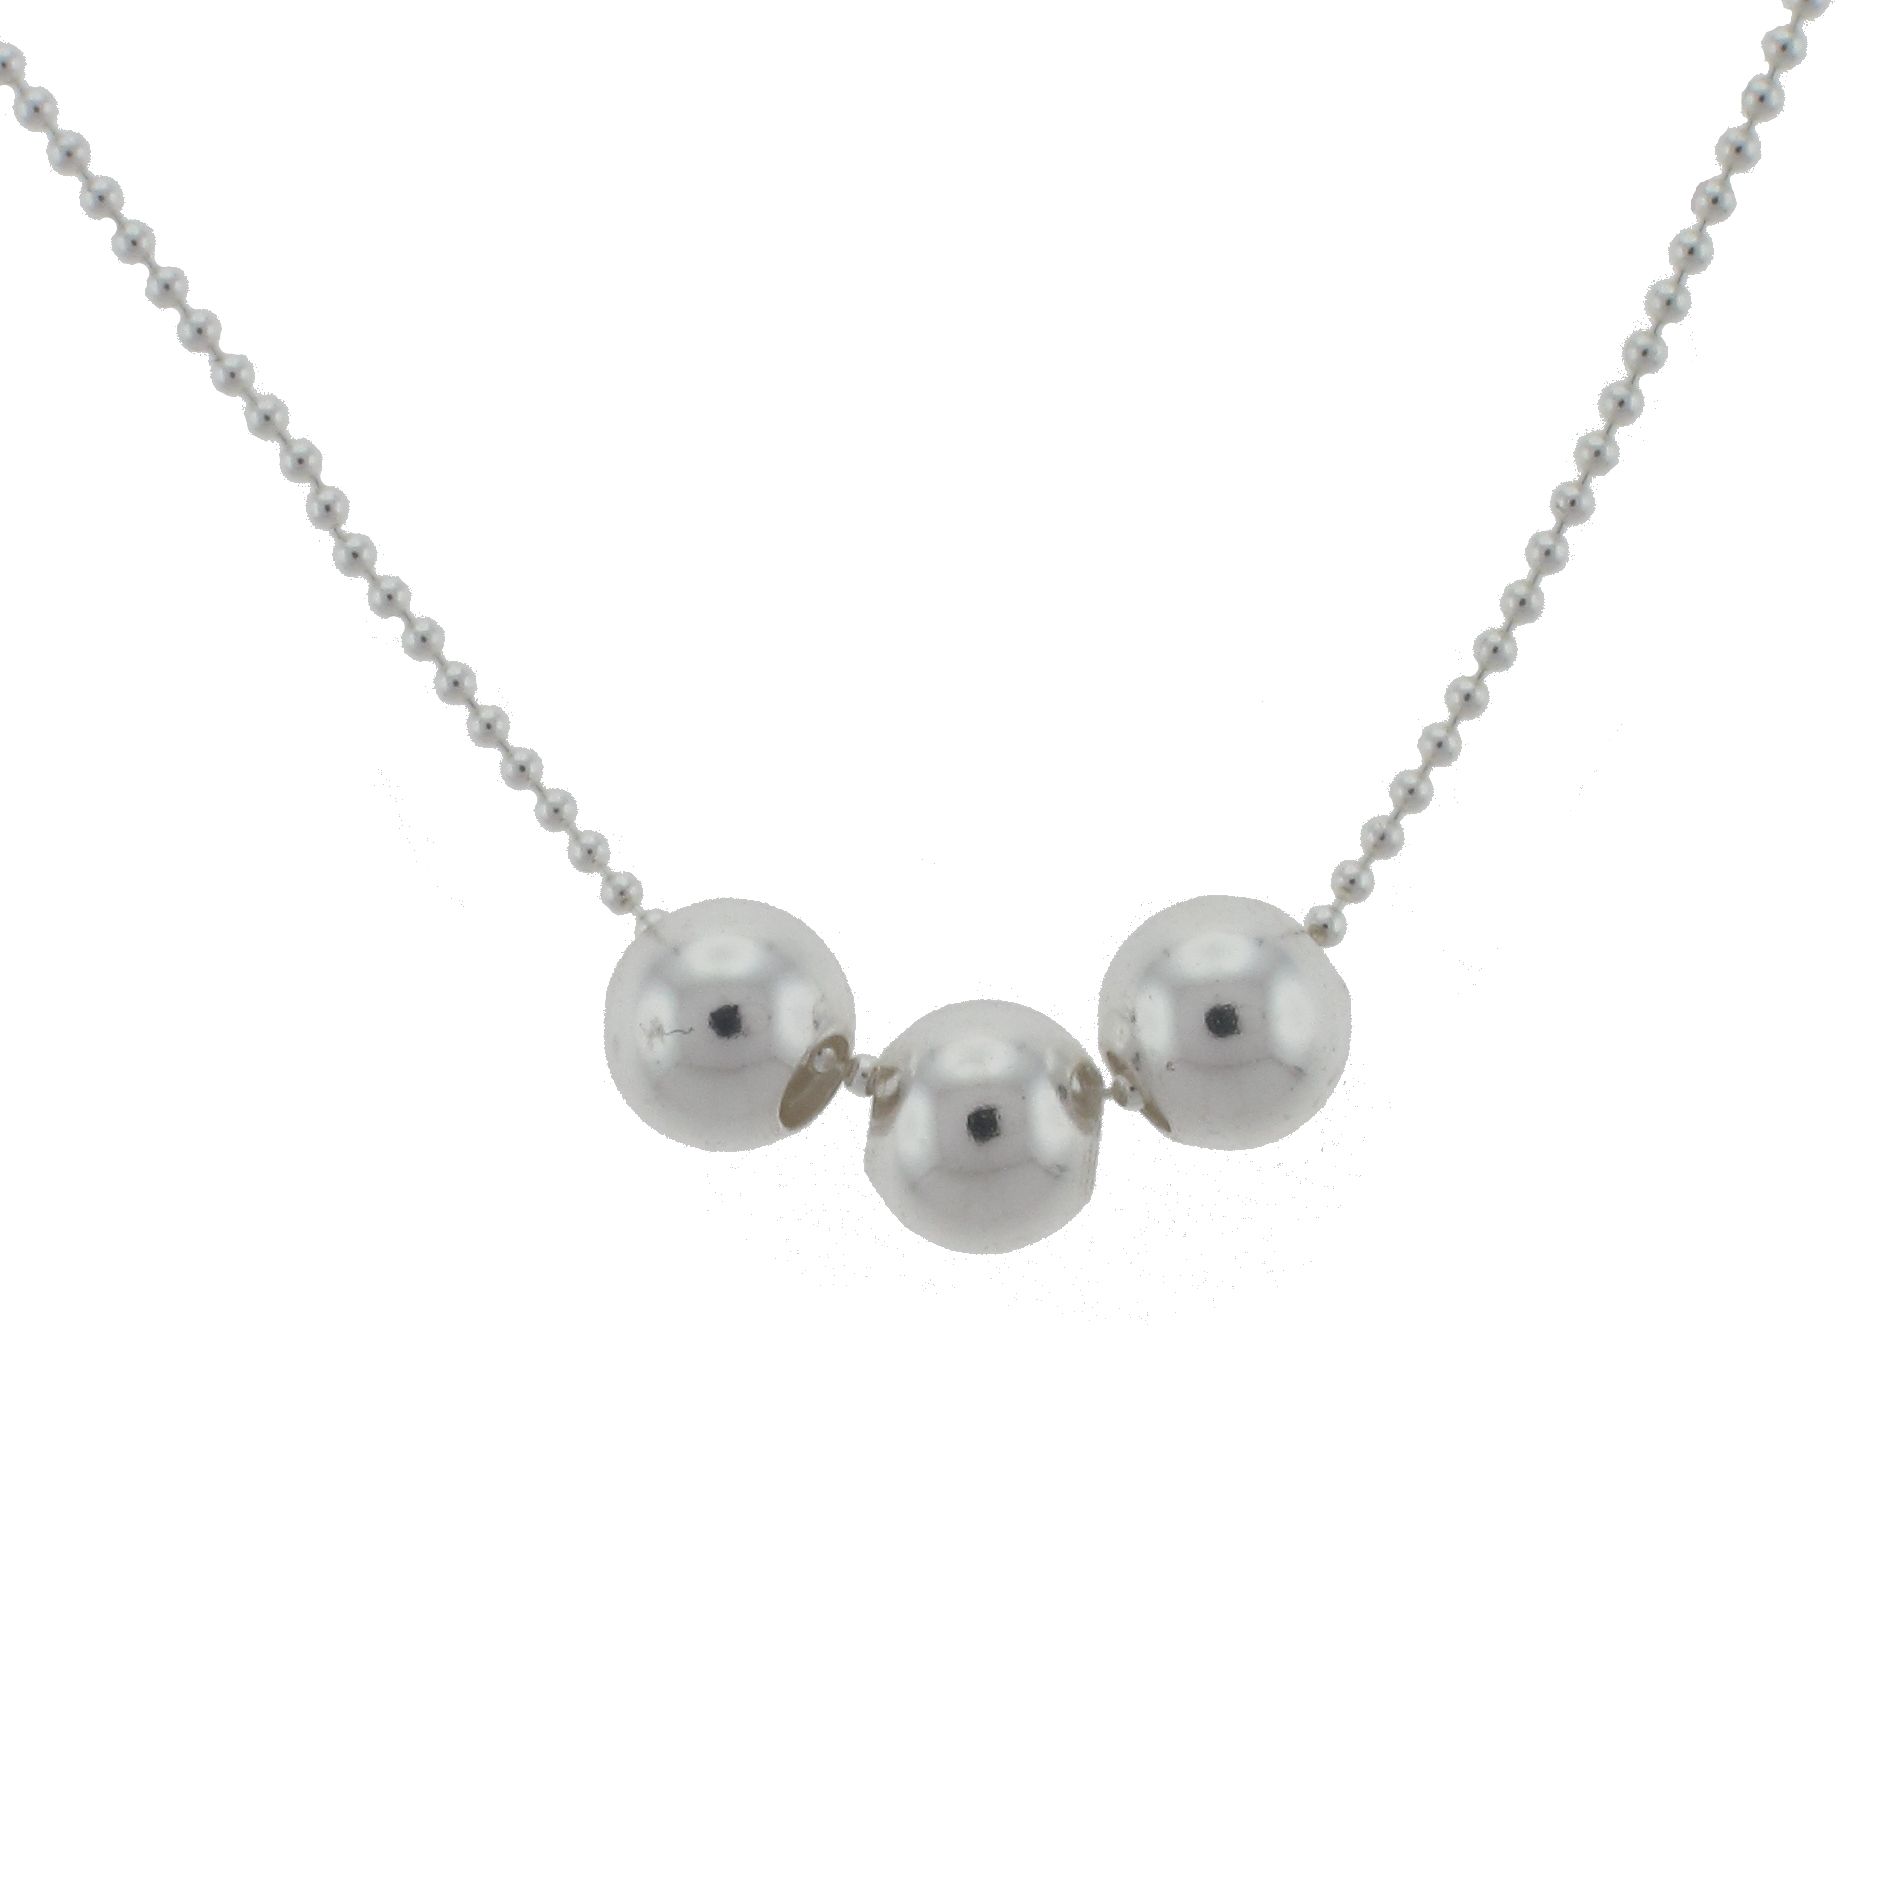 3-Bead Pendant Chain in Sterling: Interchangeable Basics from Kmart